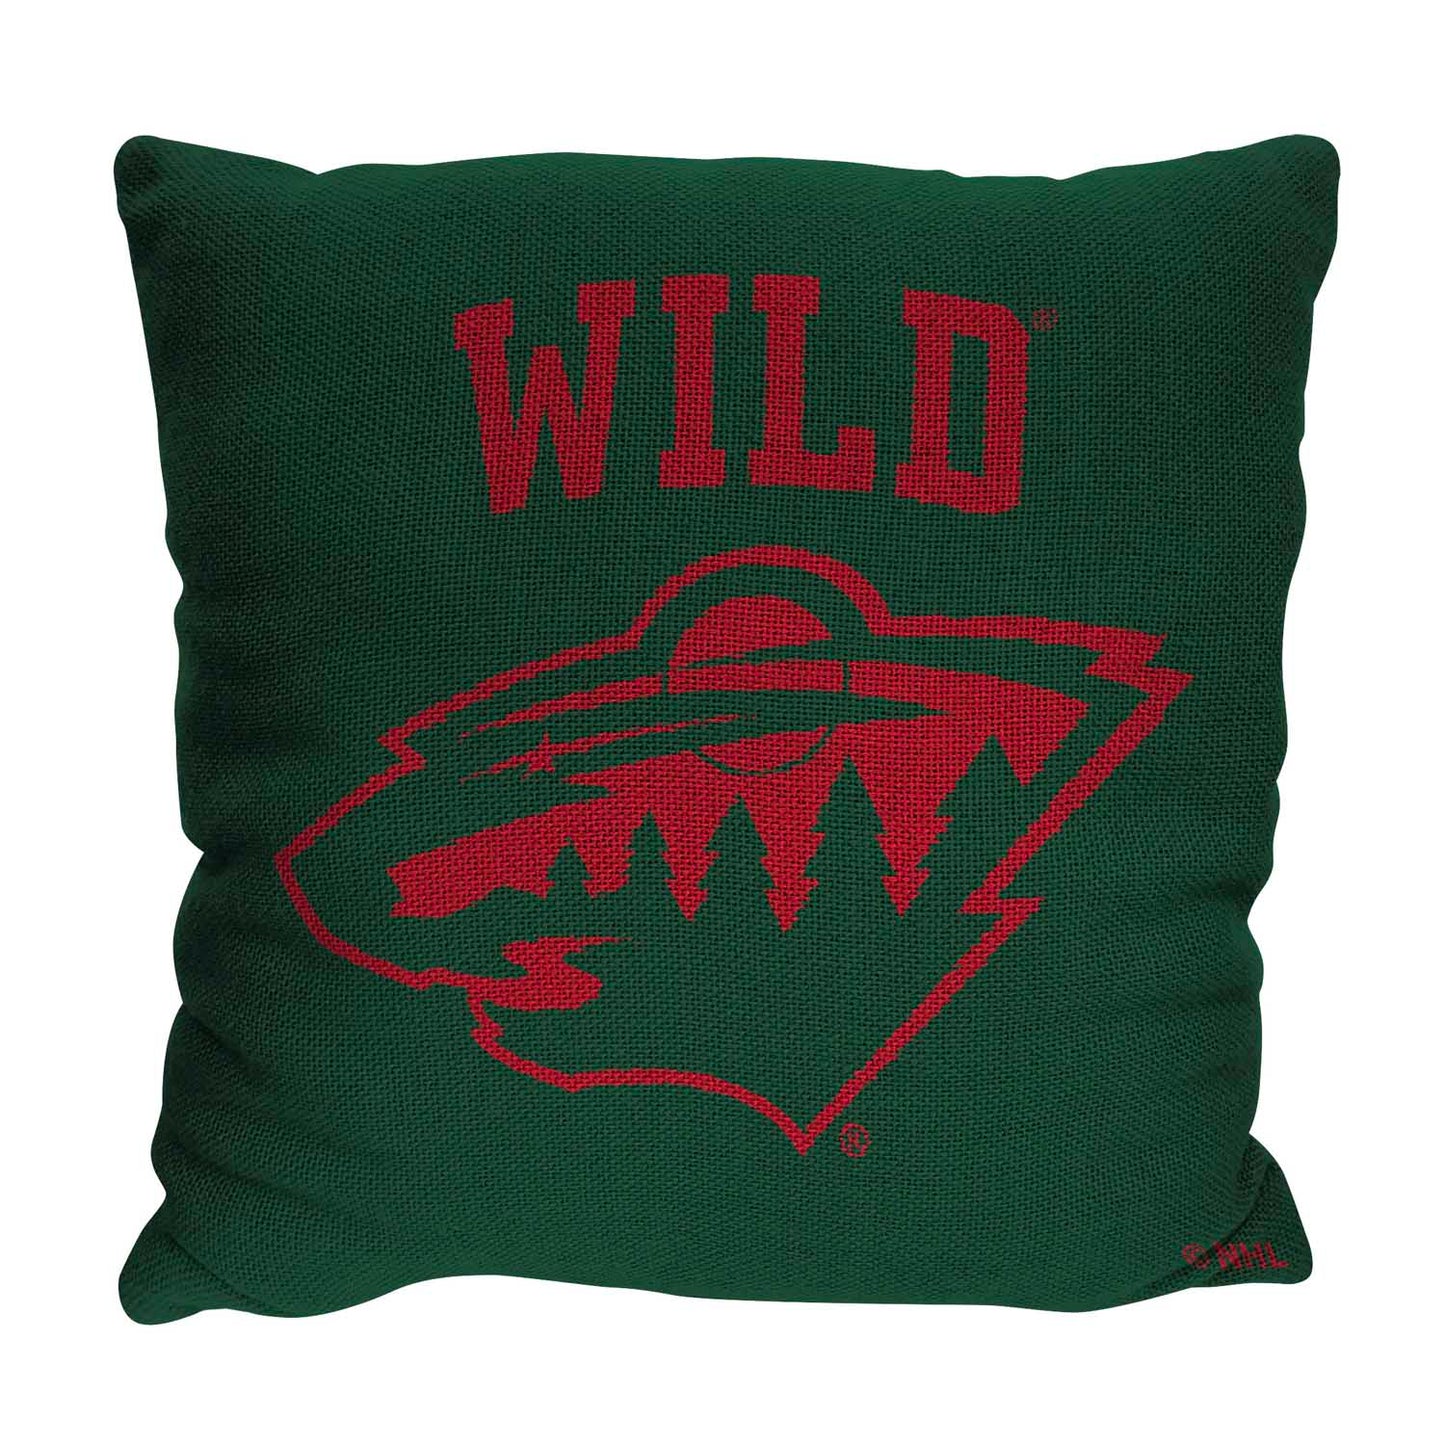 Minnesota Wild NHL Decorative Pillows- Enhance Your Space with Woven Throw Pillows - Green